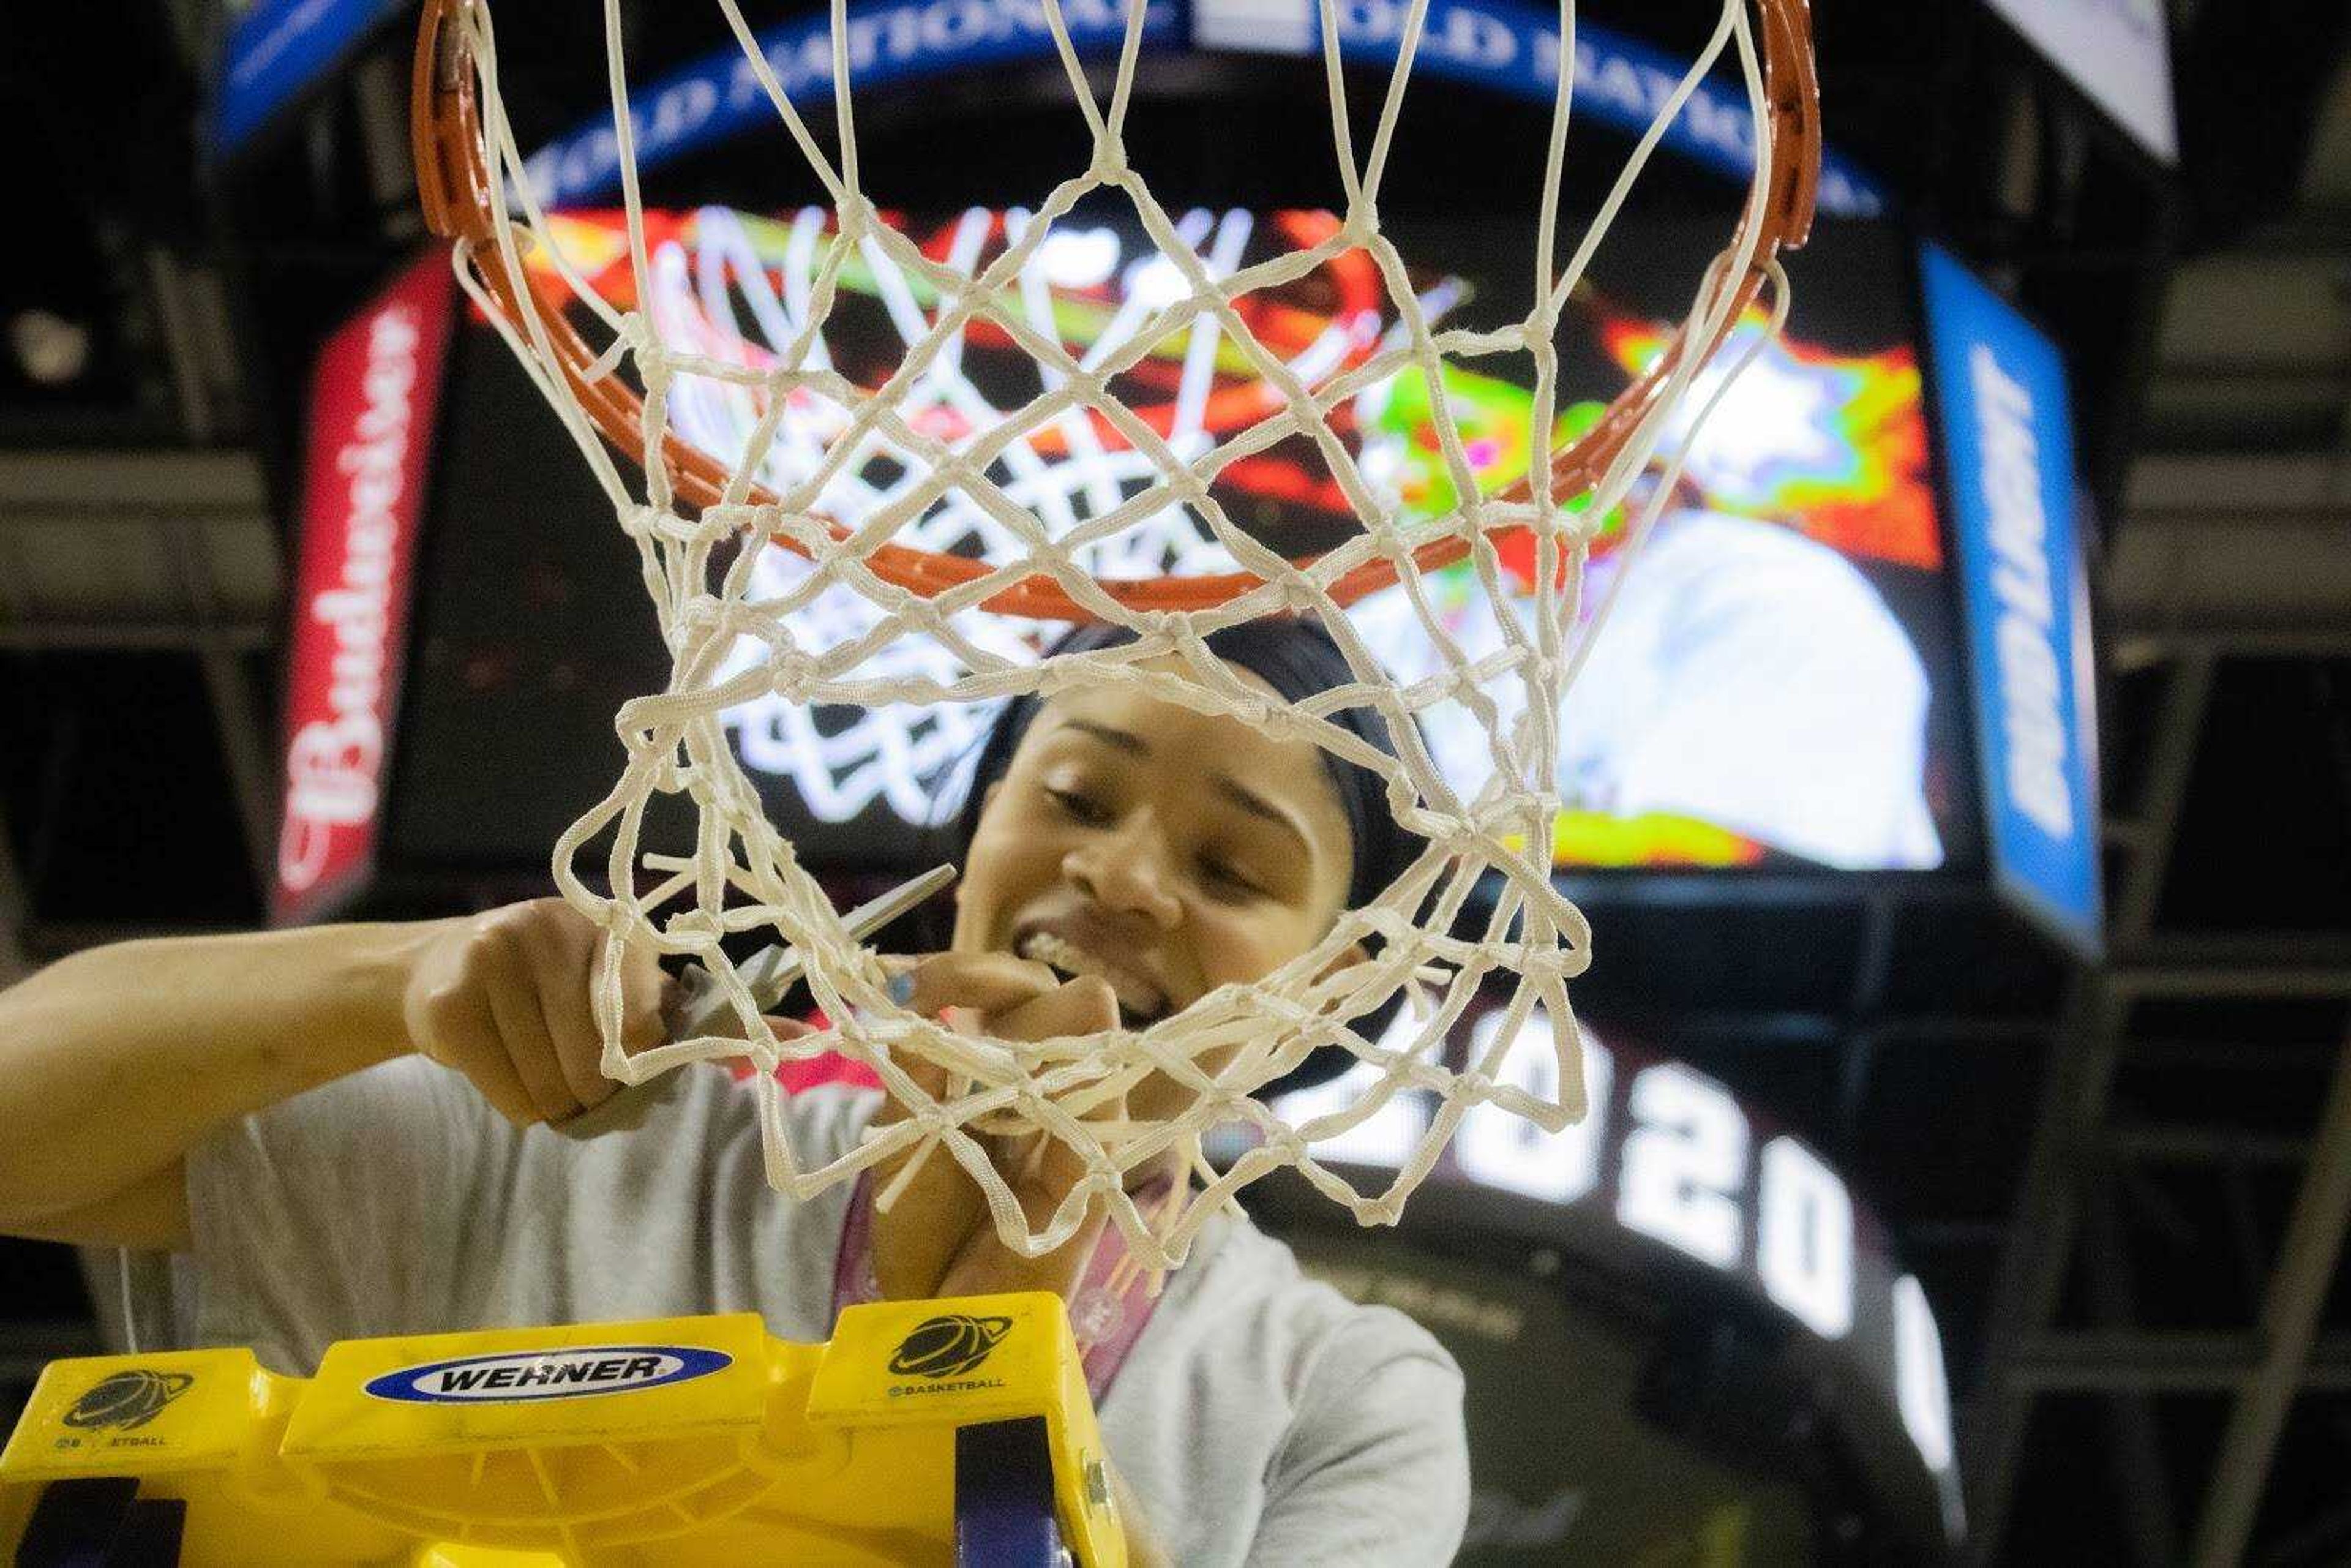 Junior Tesia Thompson cuts down the nets after the Redhawk’s Ohio Valley Conference Championship win on March 7.